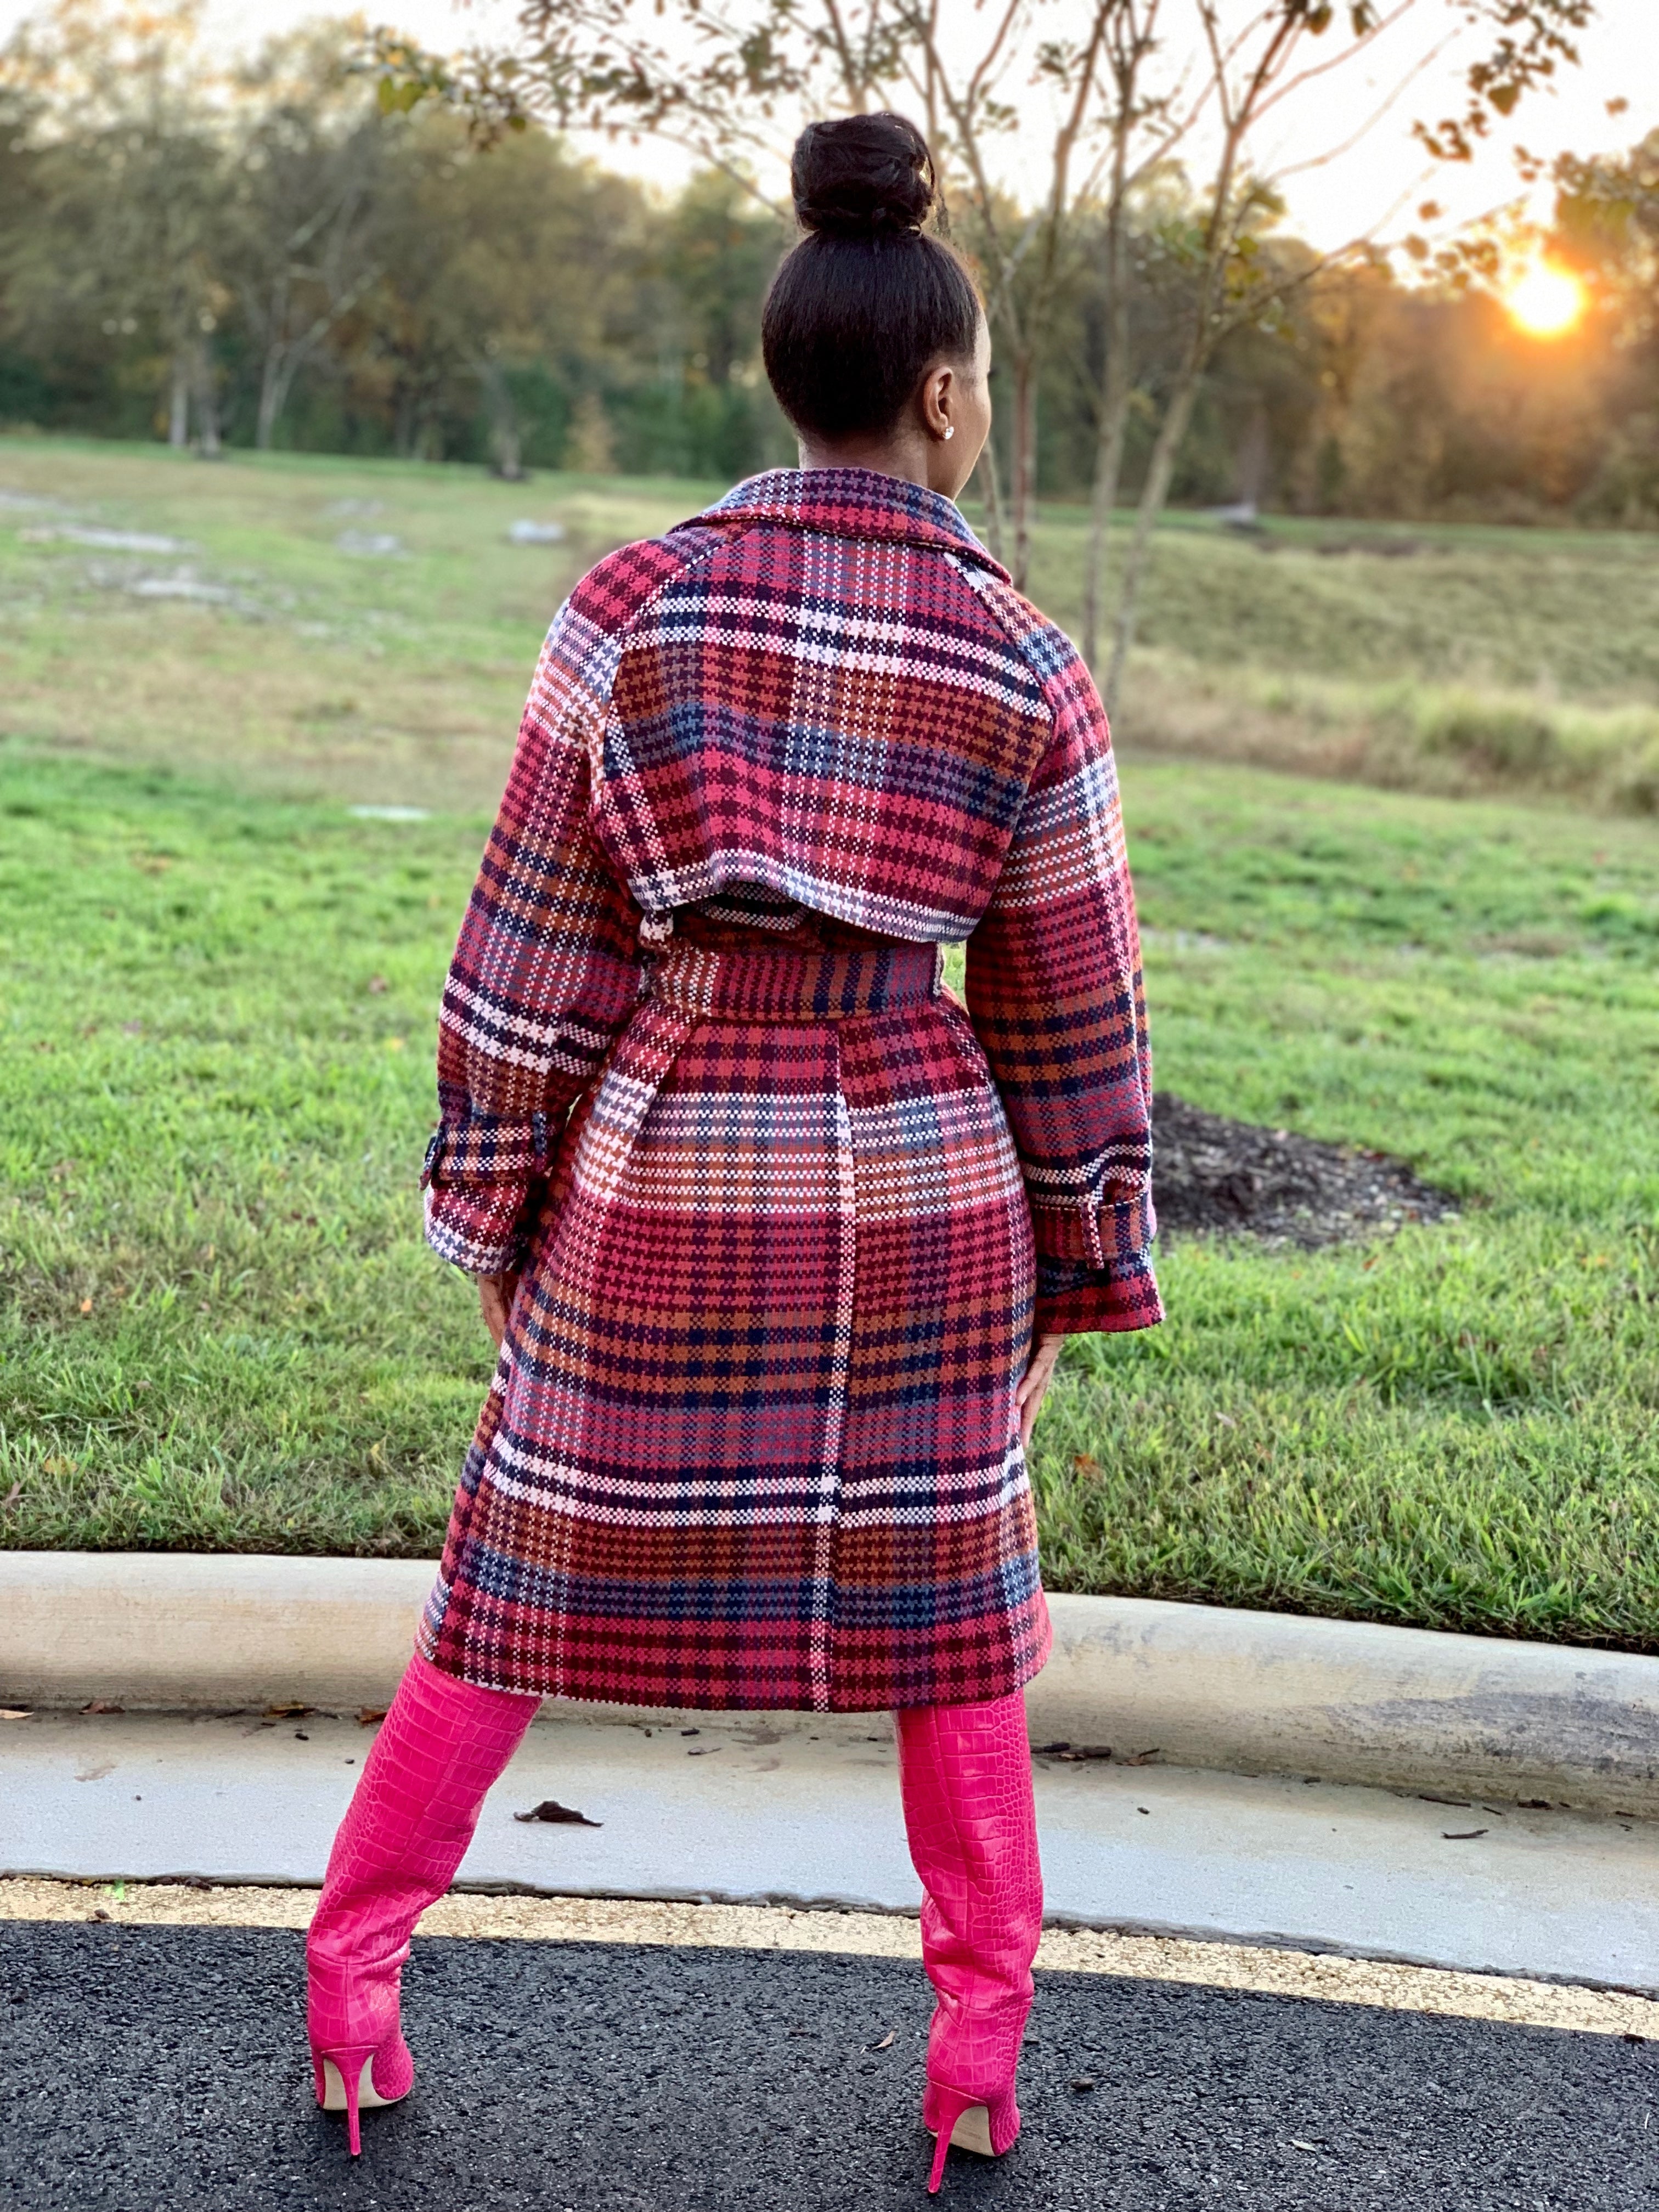 GOLDxTEAL gorgeous colorful plaid trench coat. Heavy thick trench coat in beautiful muted tones of pink, hot pink, blues, tan and cream.